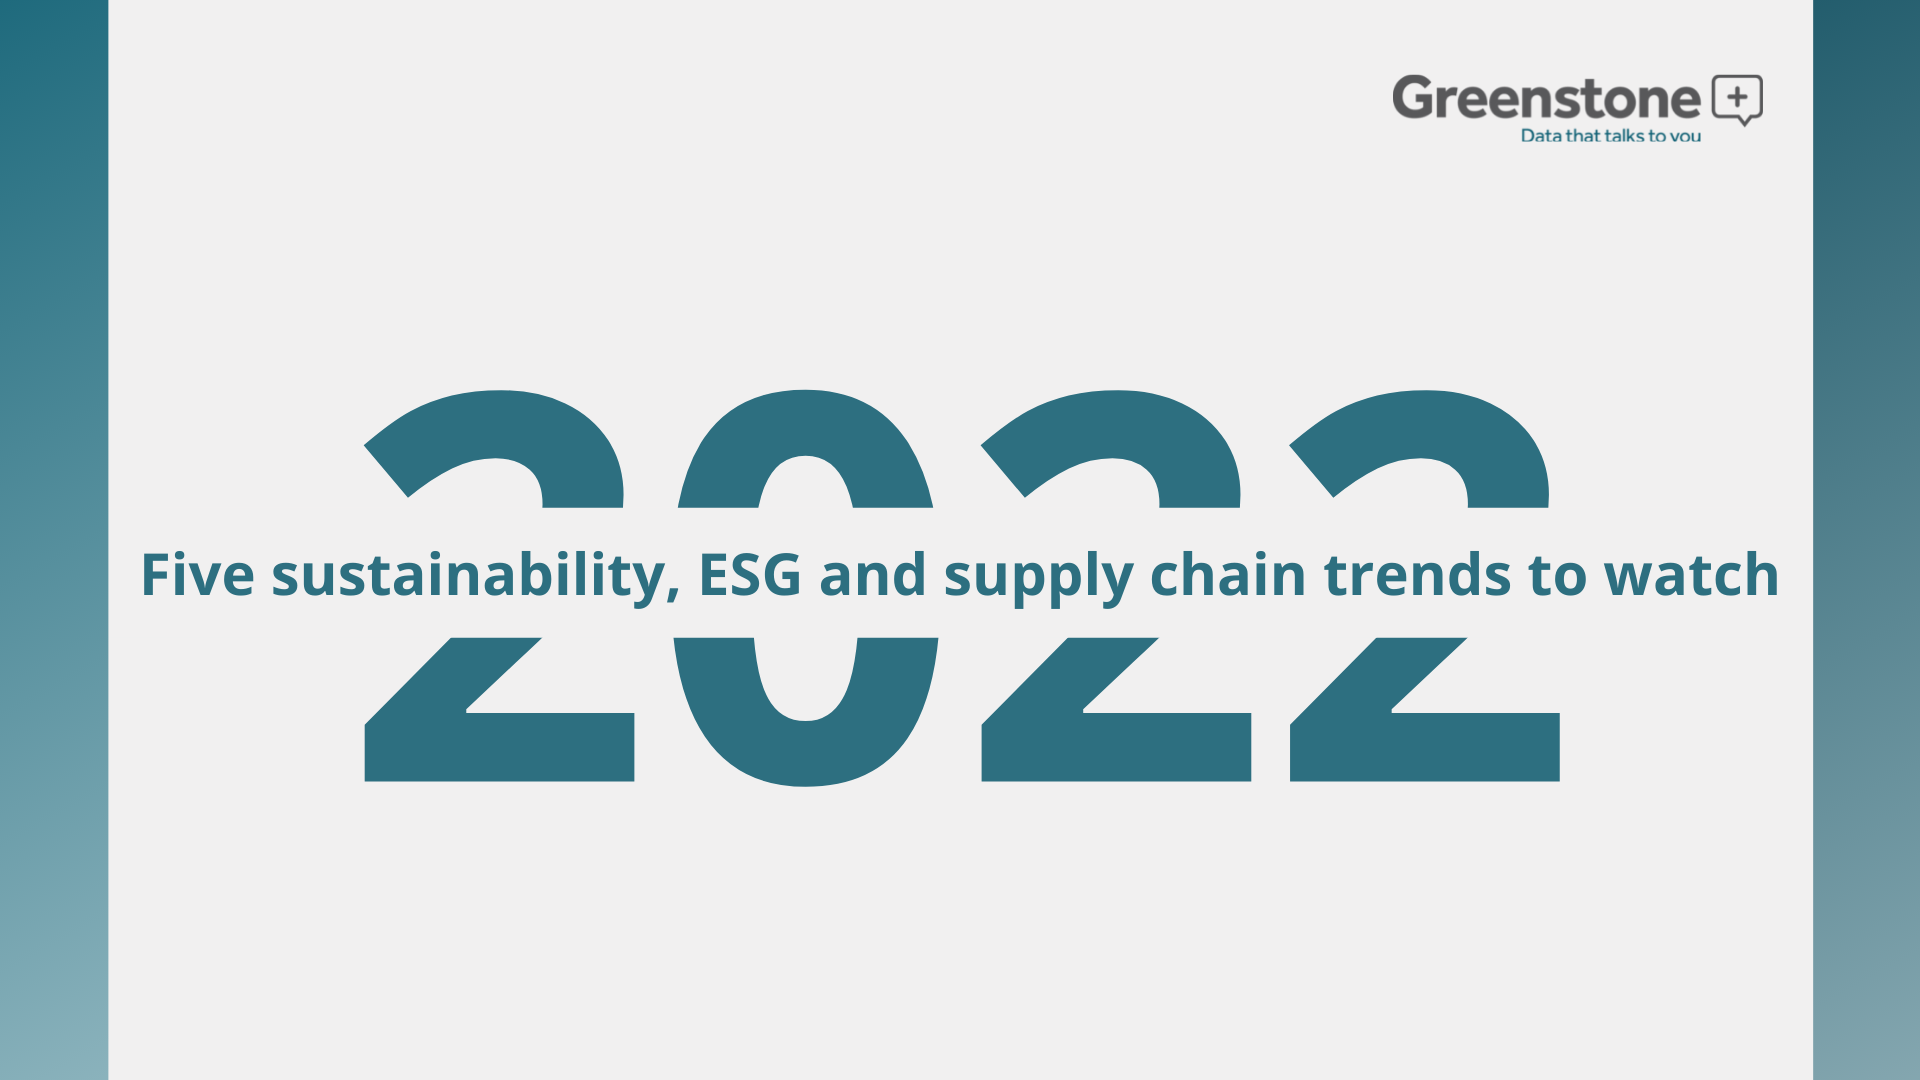 Five sustainability, ESG and supply chain trends to watch in 2022